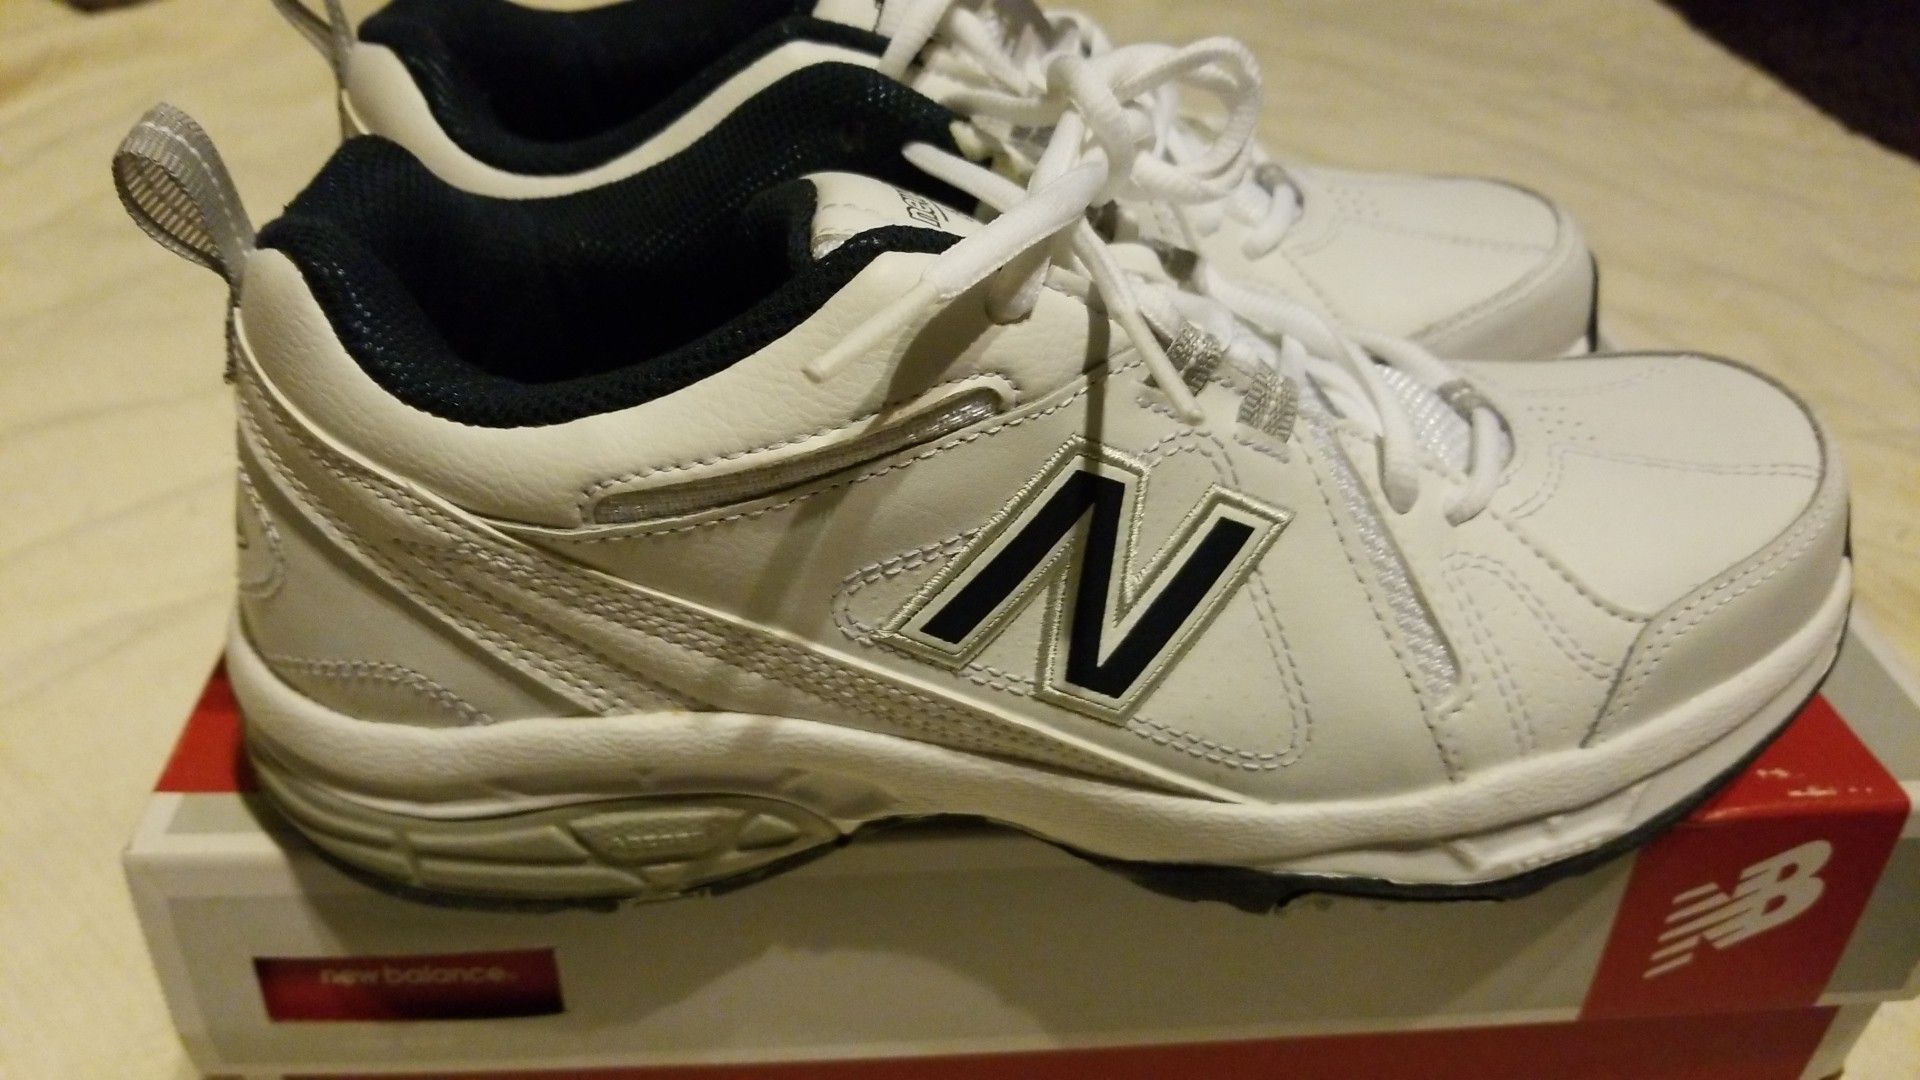 NEW mens shoes athletic leather NEW BALANCE sz 8.5